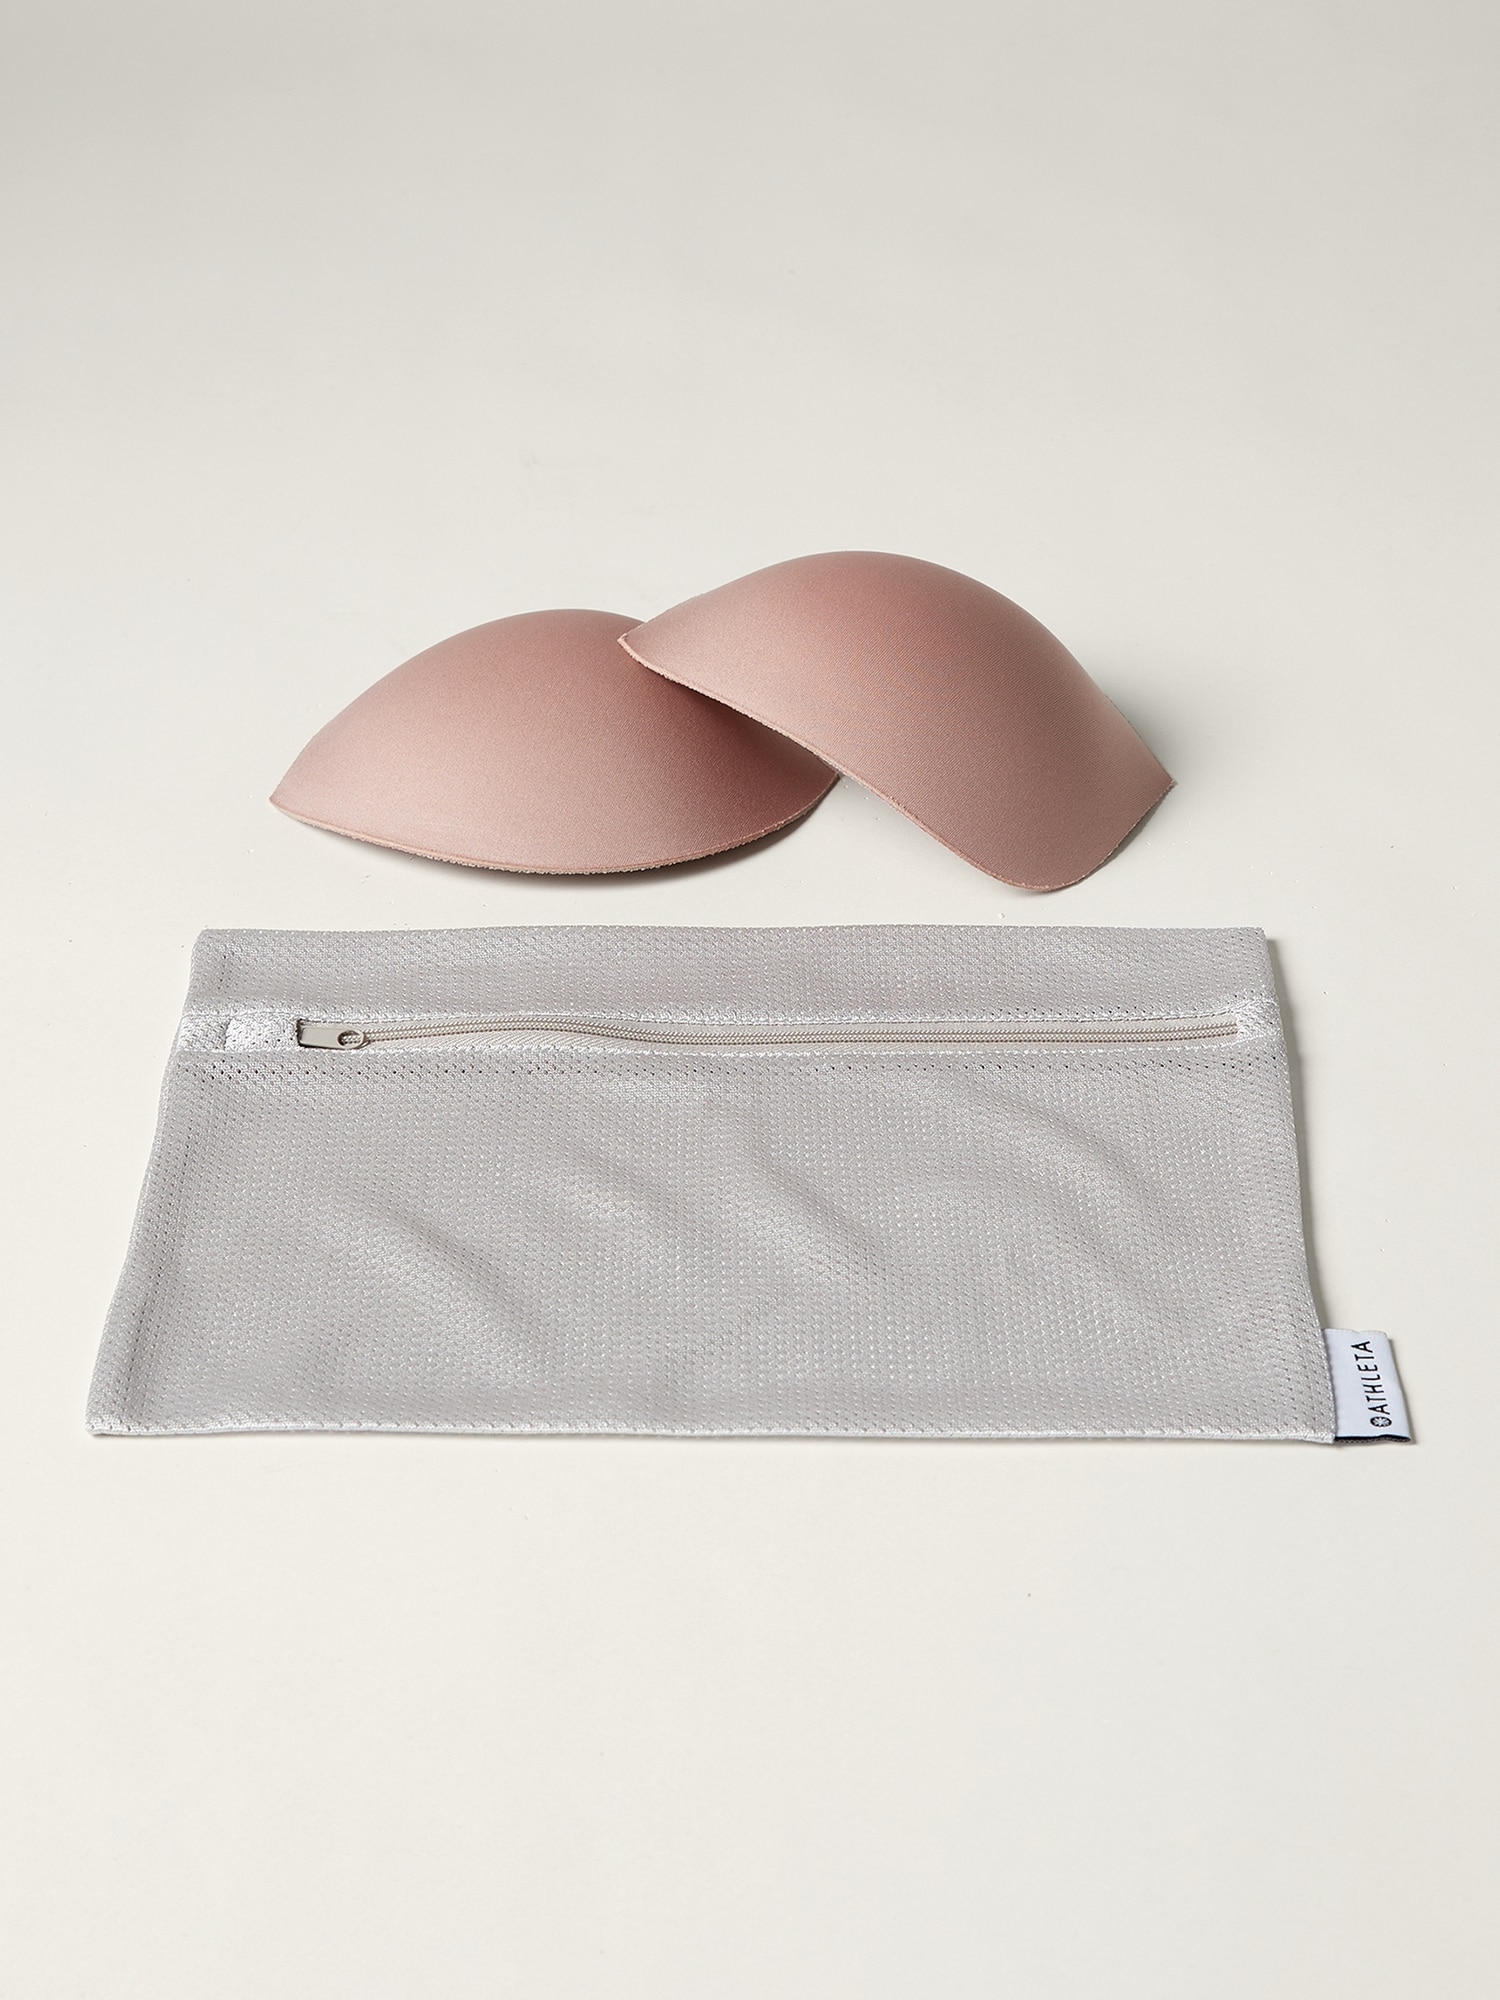 Bras Insert Breathable Soft, Sponge Foam Breast Protective Pad Bra Insert, Prosthesis  Bra Insert for Breast Protection Surgery Recovery, Zero Pressure Mastectomy  Foam Breast Implant for Women(L) : : Fashion